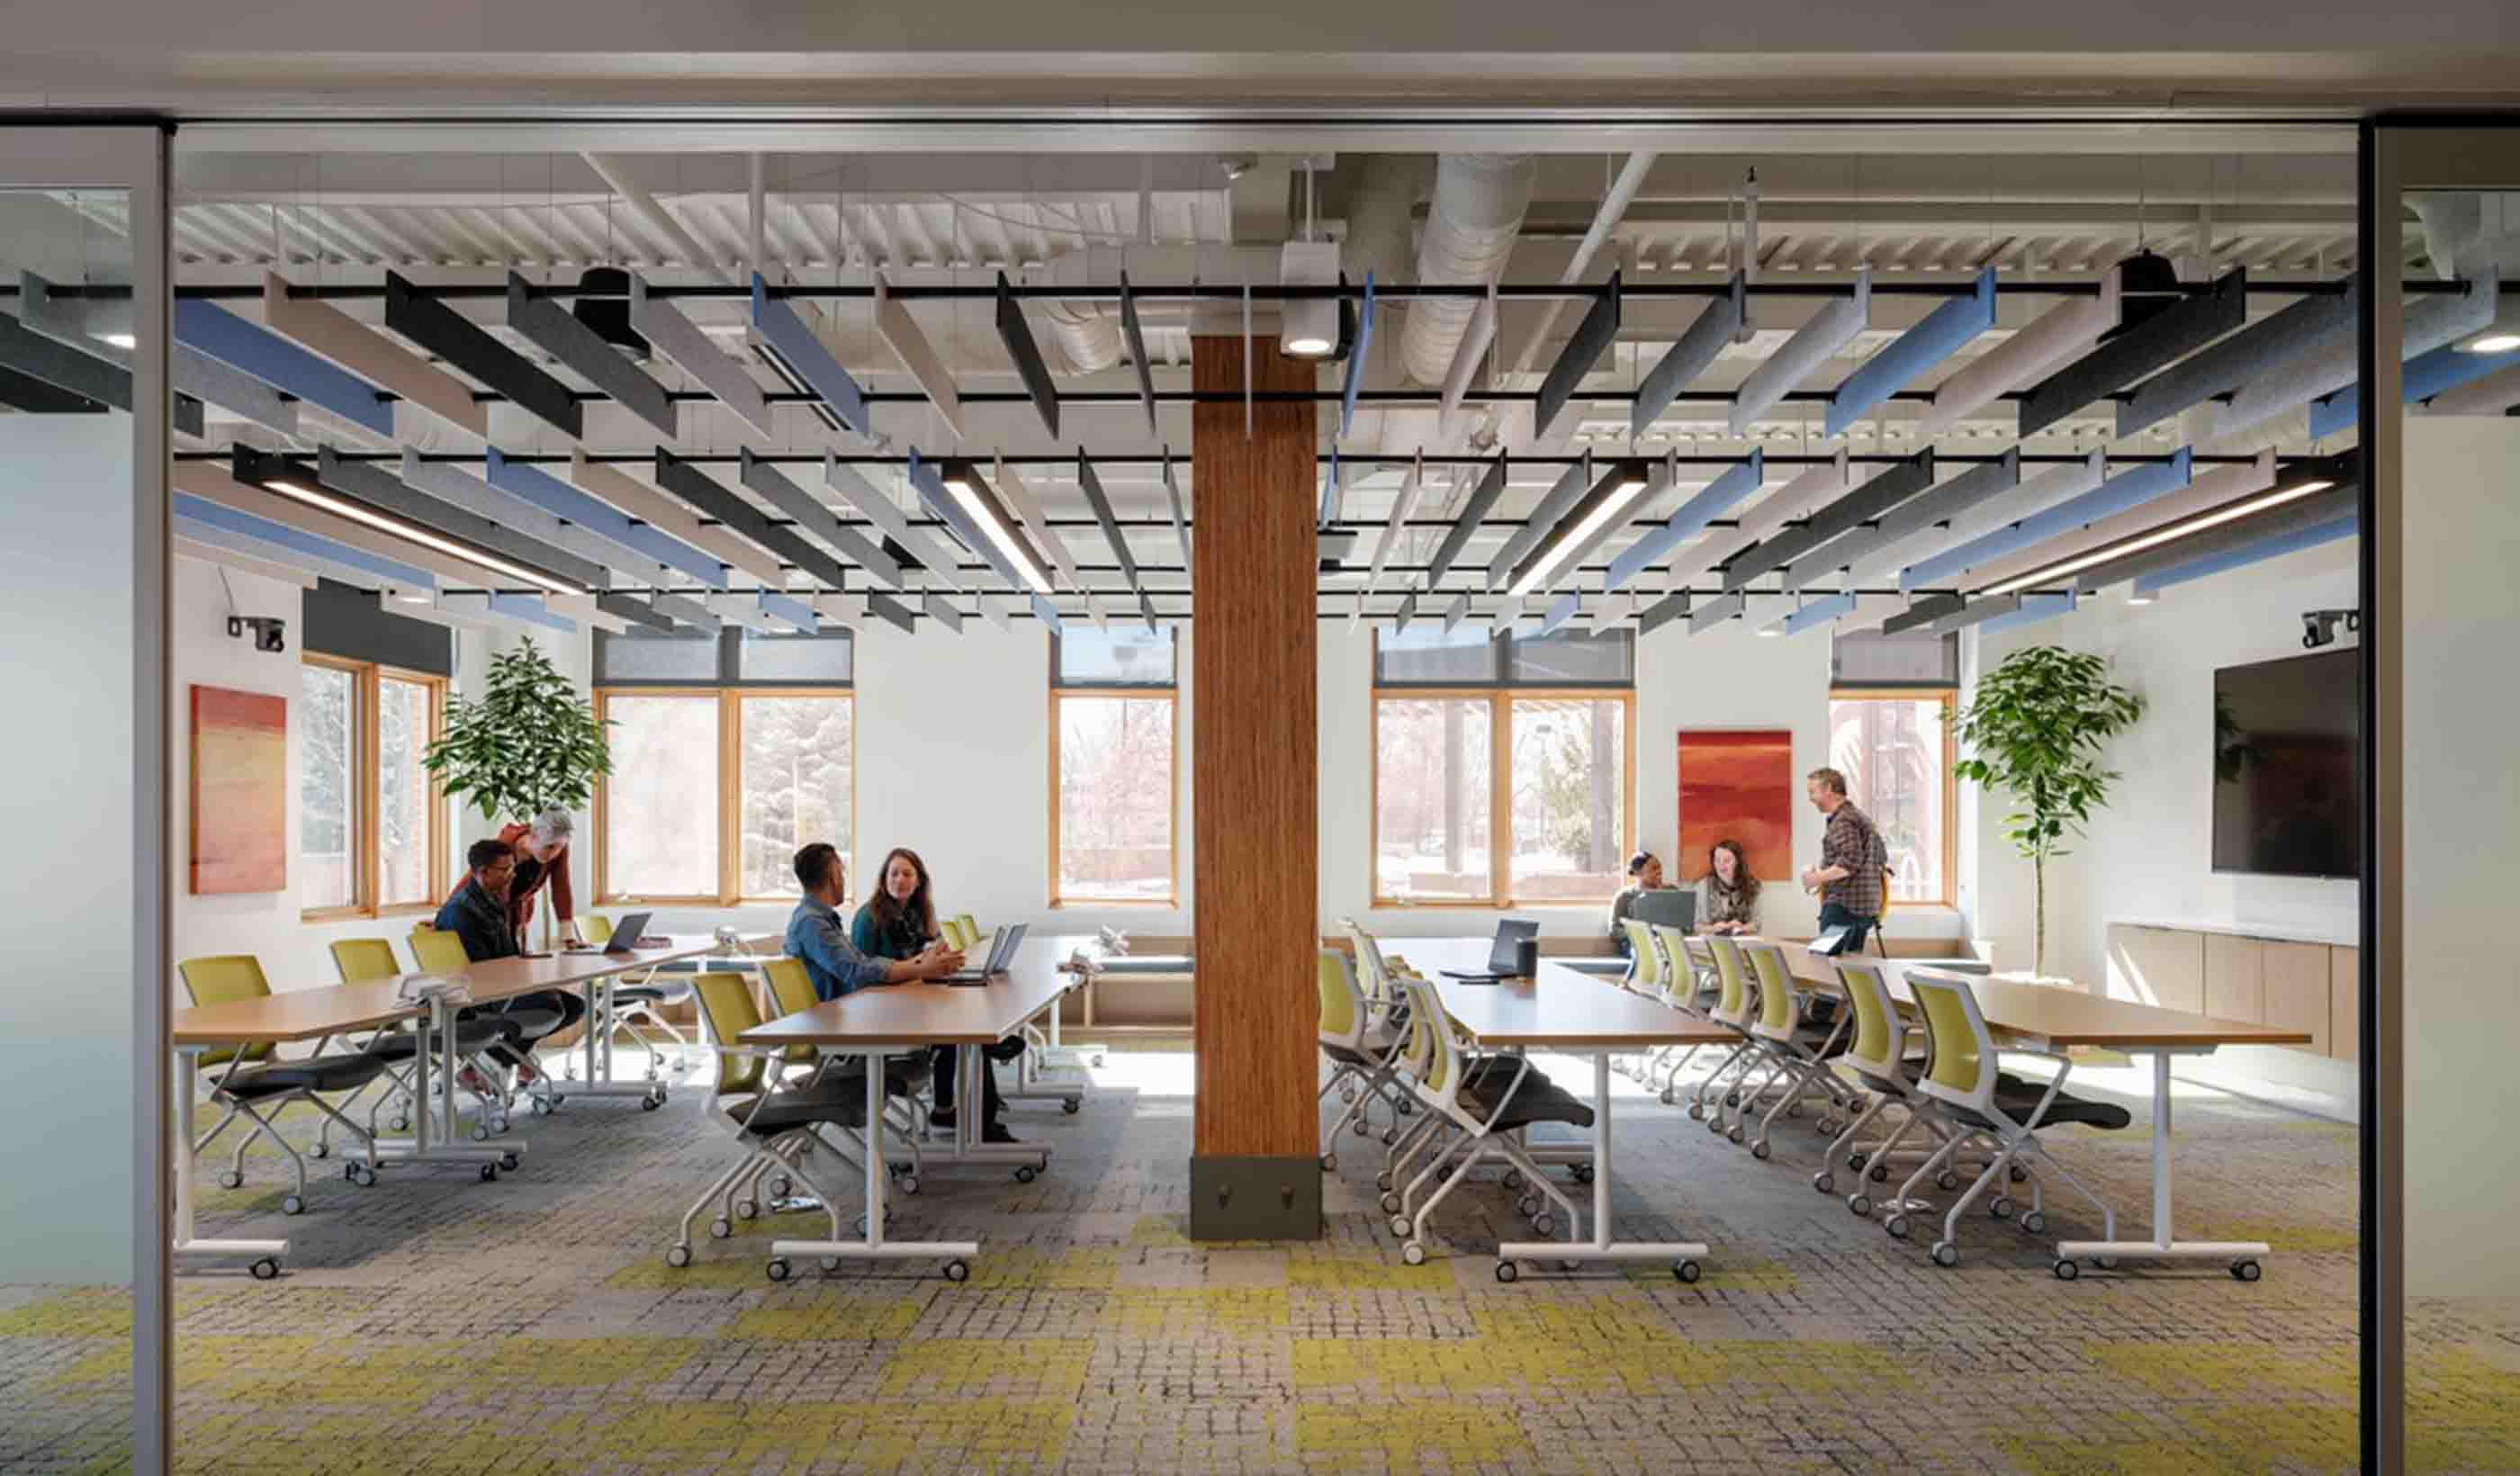 Sounding off on open office plans and workplace acoustics